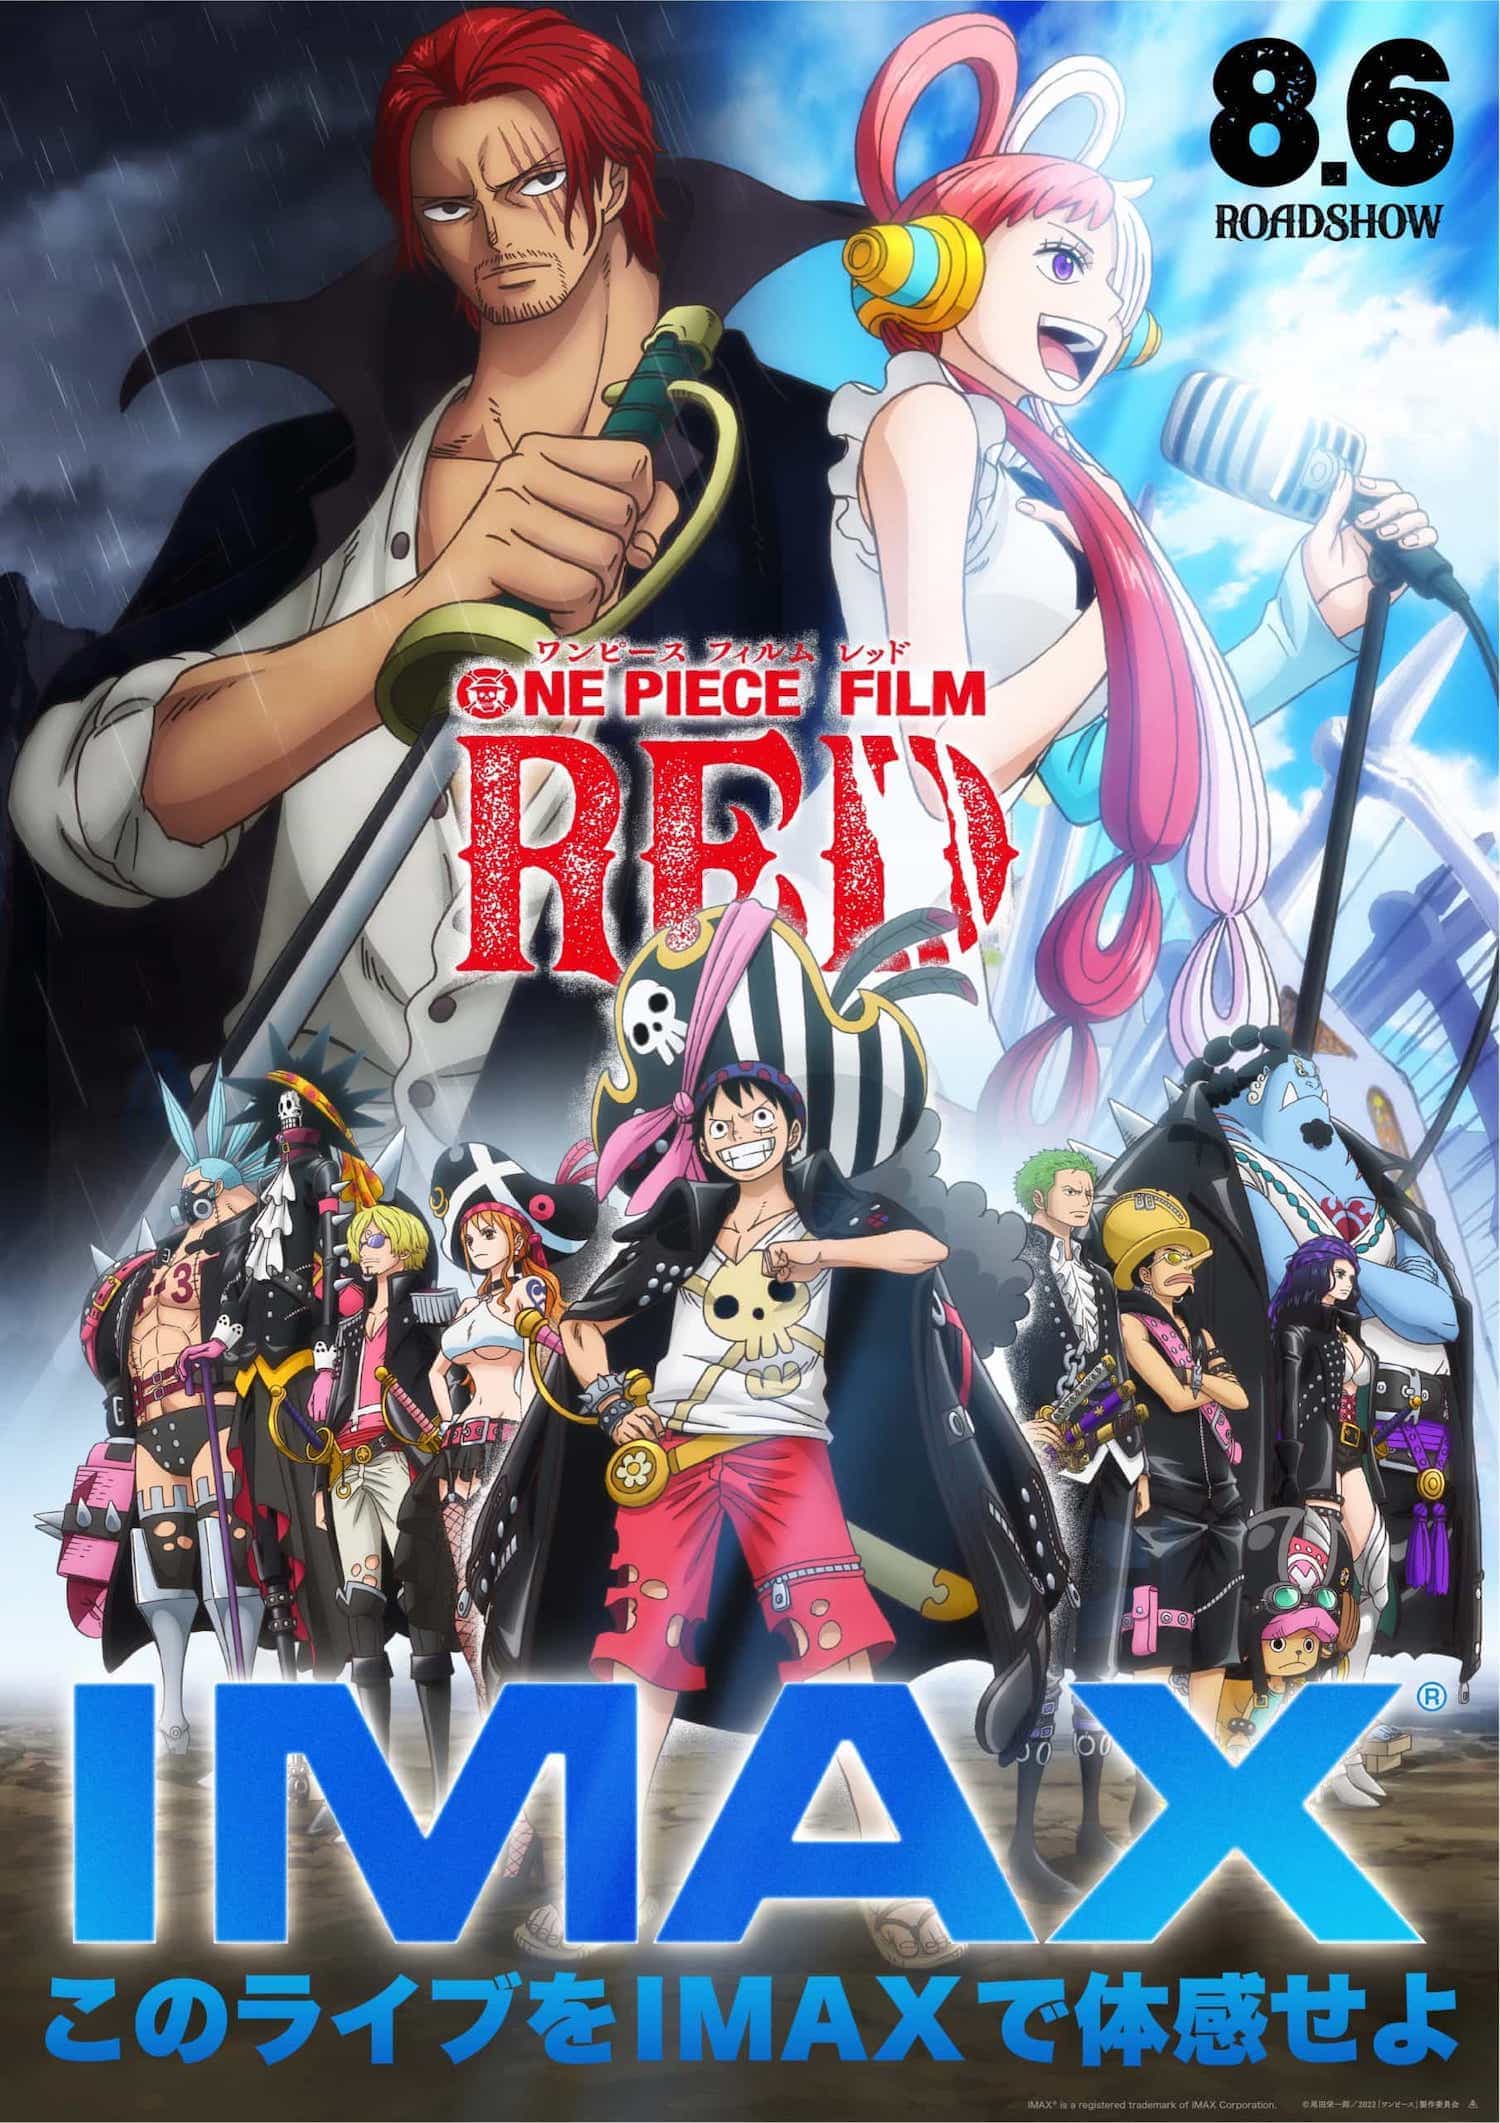 How to Watch One Piece Film Red  Showtimes and Streaming Status  IGN